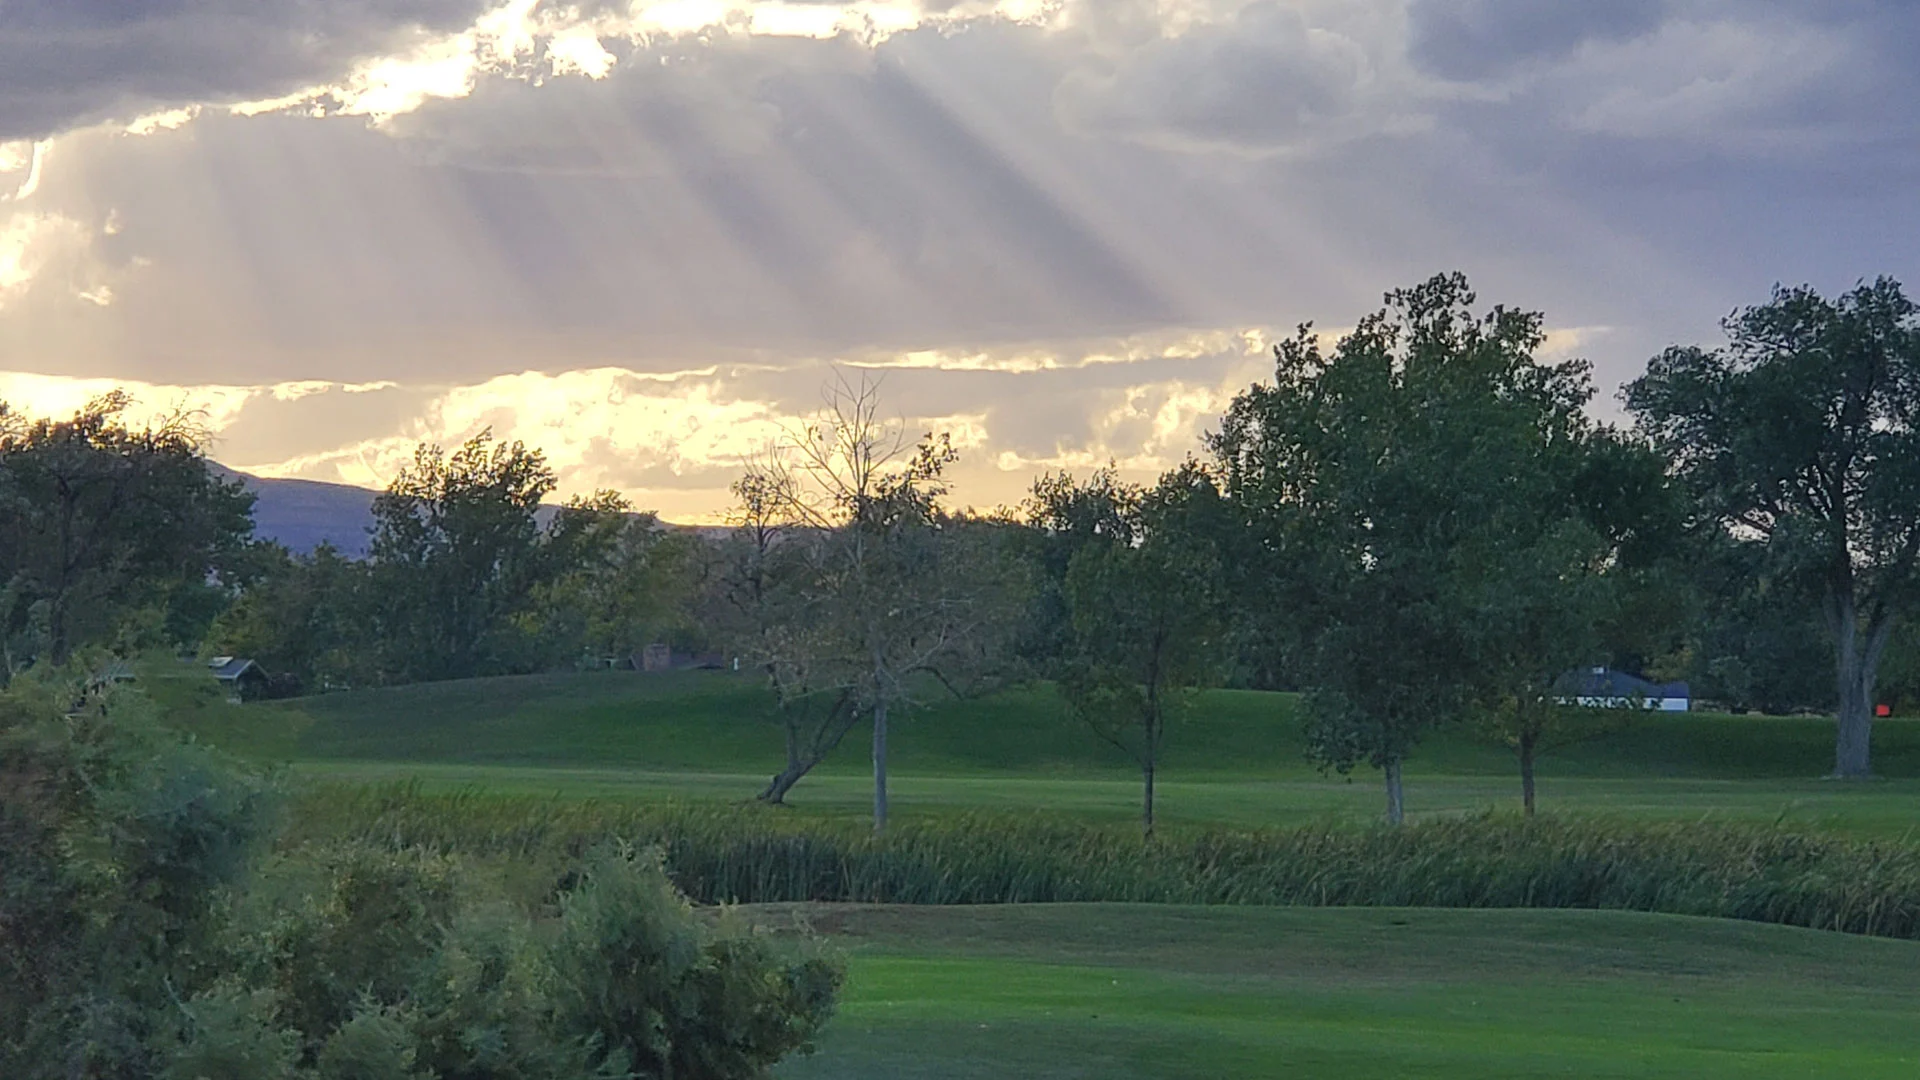 Sunset rays peaking through clouds in the sky over landscape in Redlands, CO.